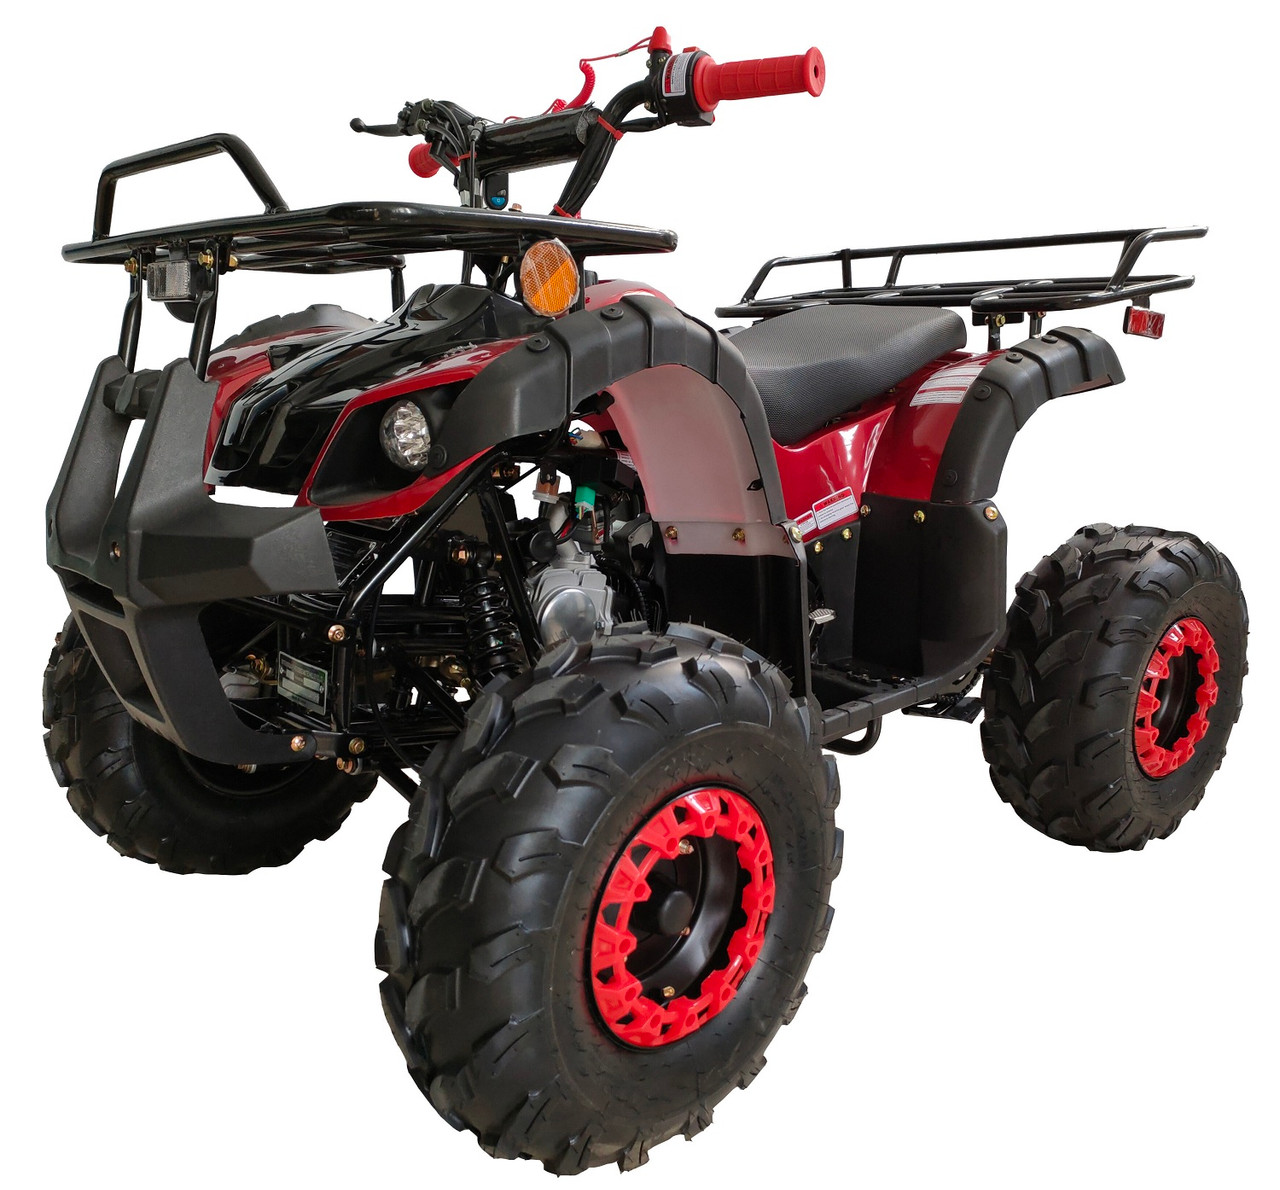 Vitacci New Rider-12 125Cc Atv, Automatic, 8" tire - Foot Shifter - Fully Assembled and Tested